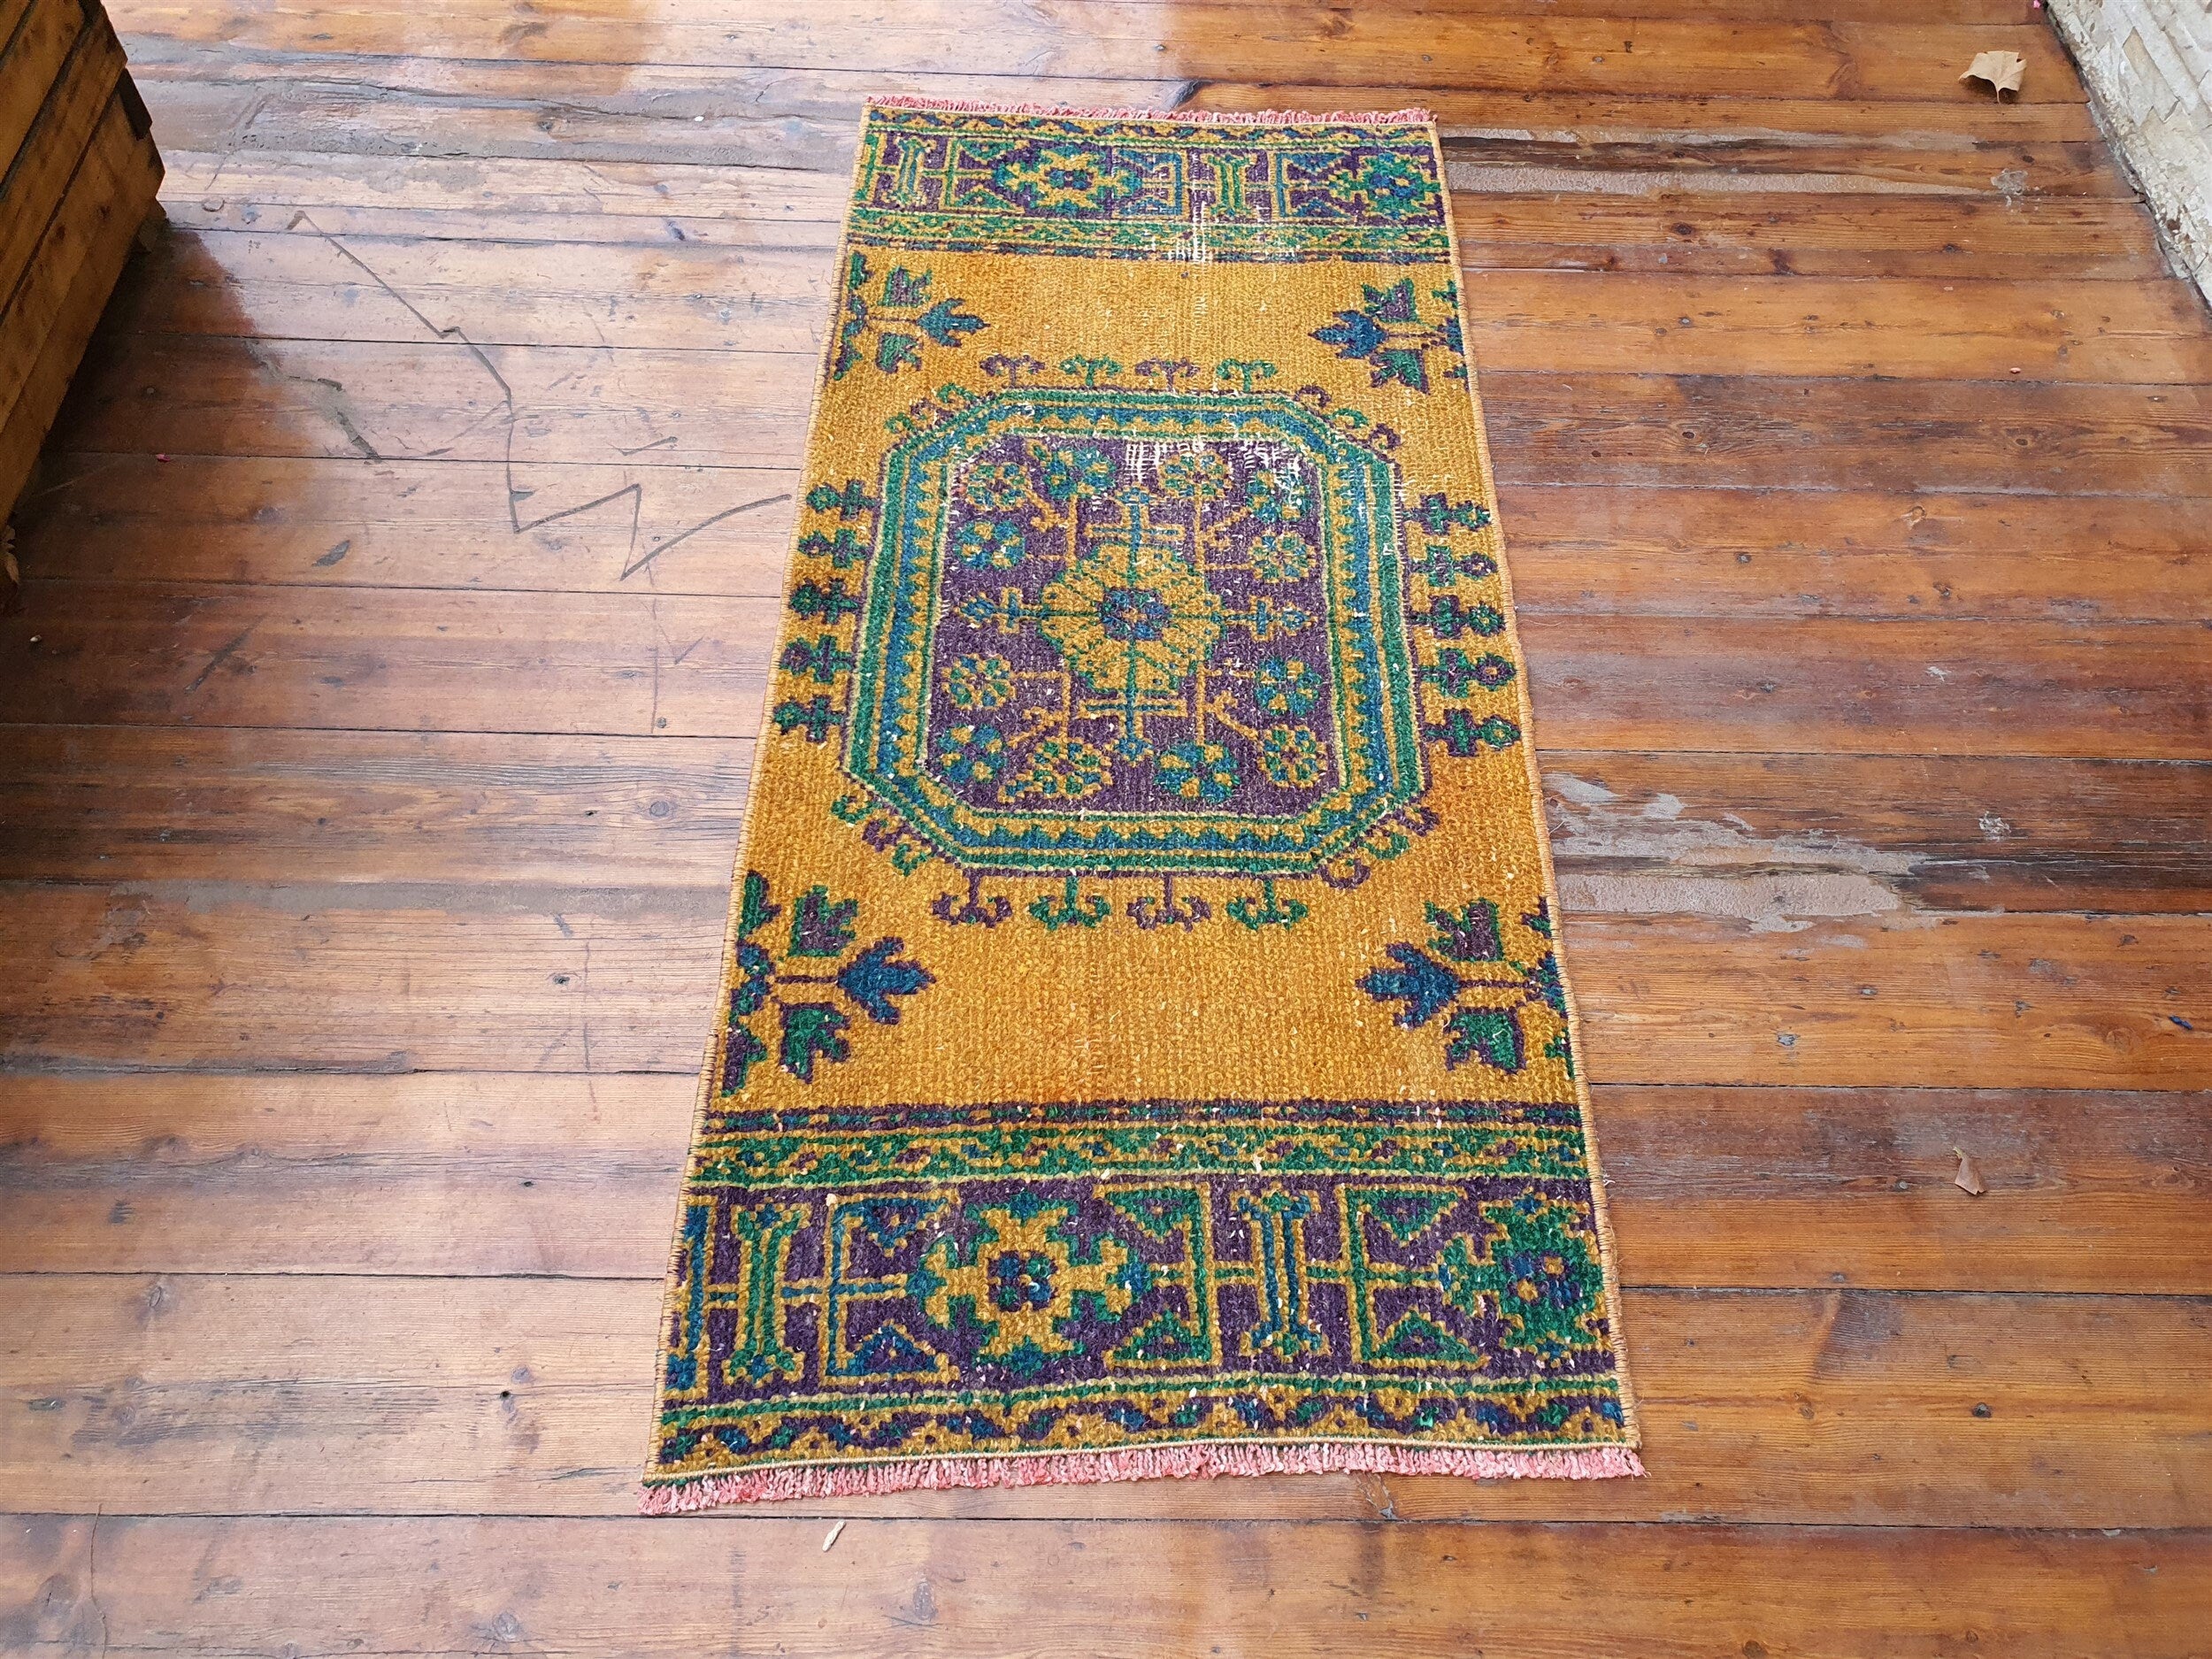 Small Turkish Rug, 4 ft 3 in x 2 ft, Apricot Orange and Teal Green Vintage Faded Distressed Door Mat